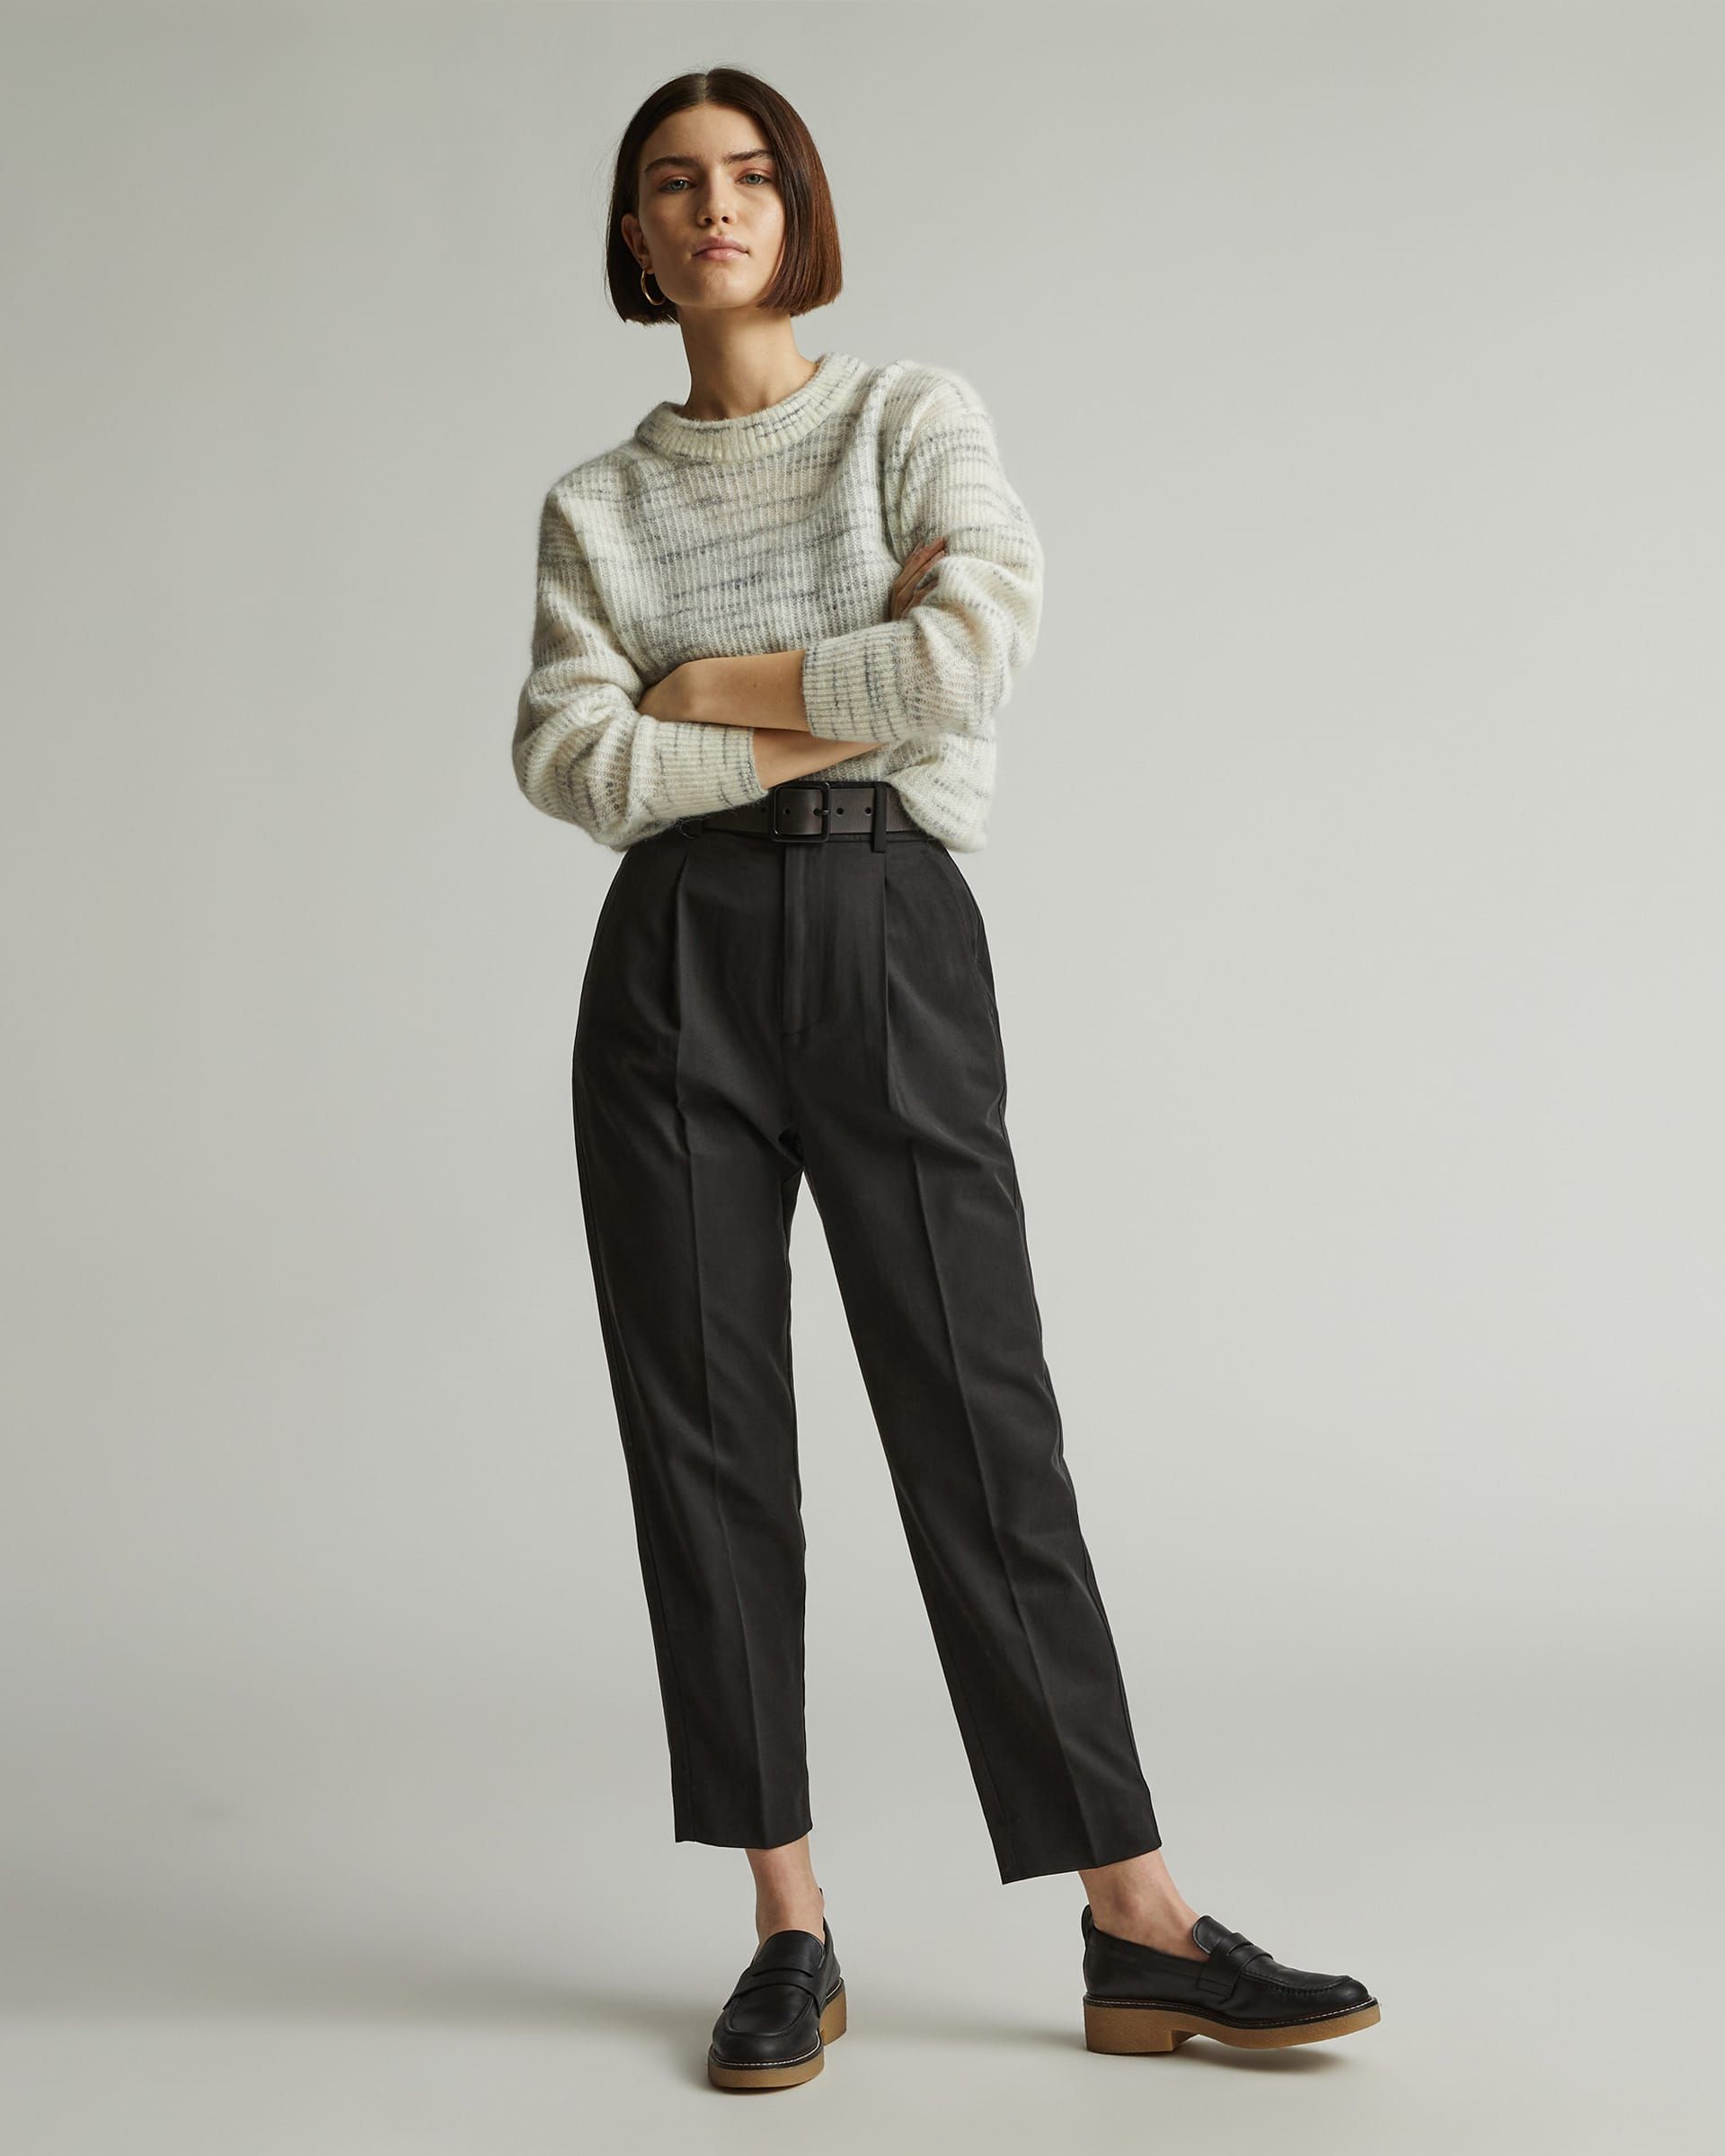 Best work trousers for women 2022: Zara, H&M, The Frankie Shop and more |  The Independent